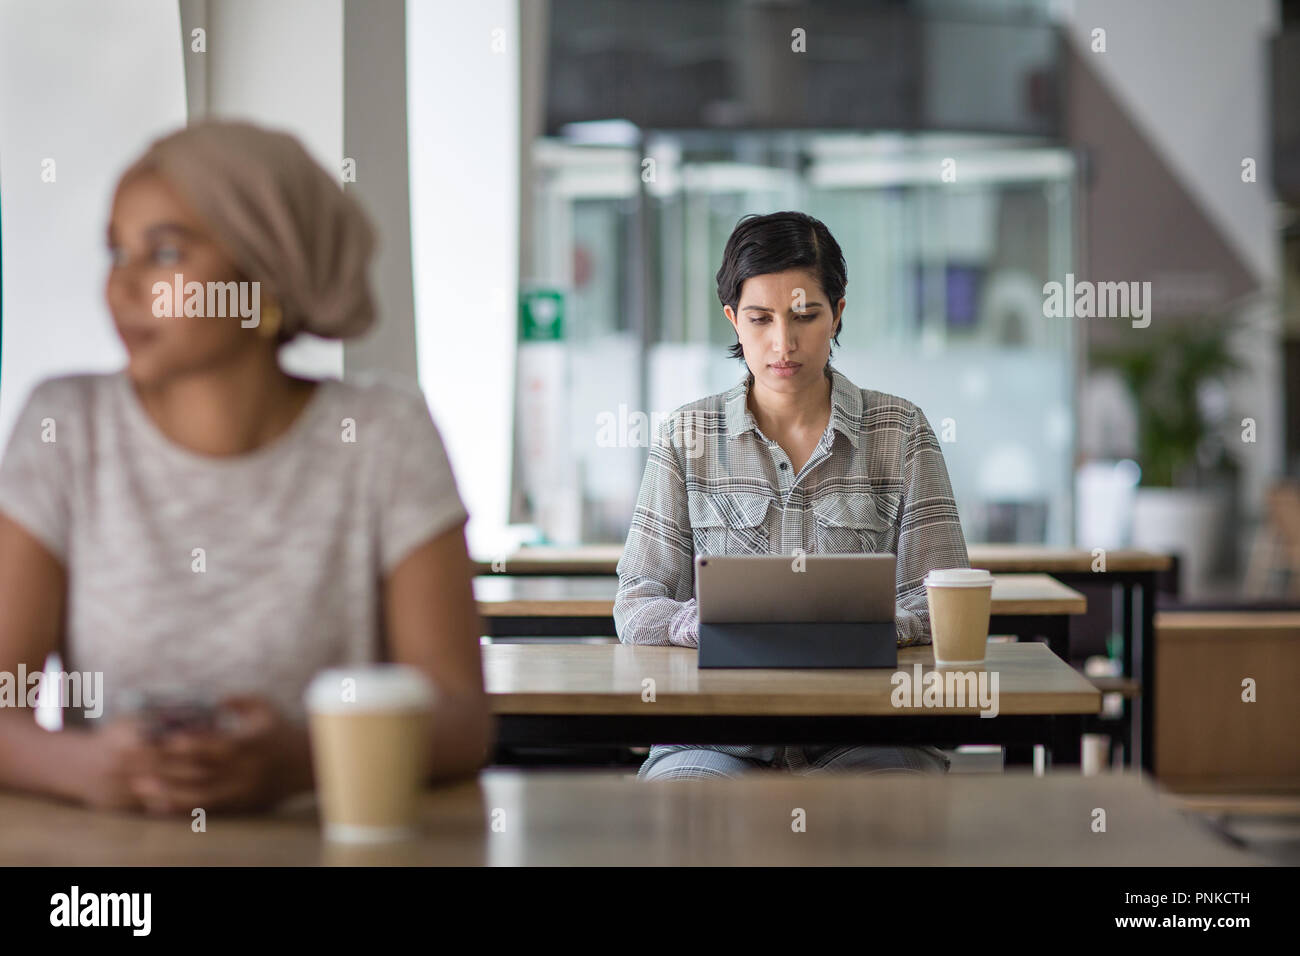 Arabic businesswoman using a digital tablet in a cafe Stock Photo